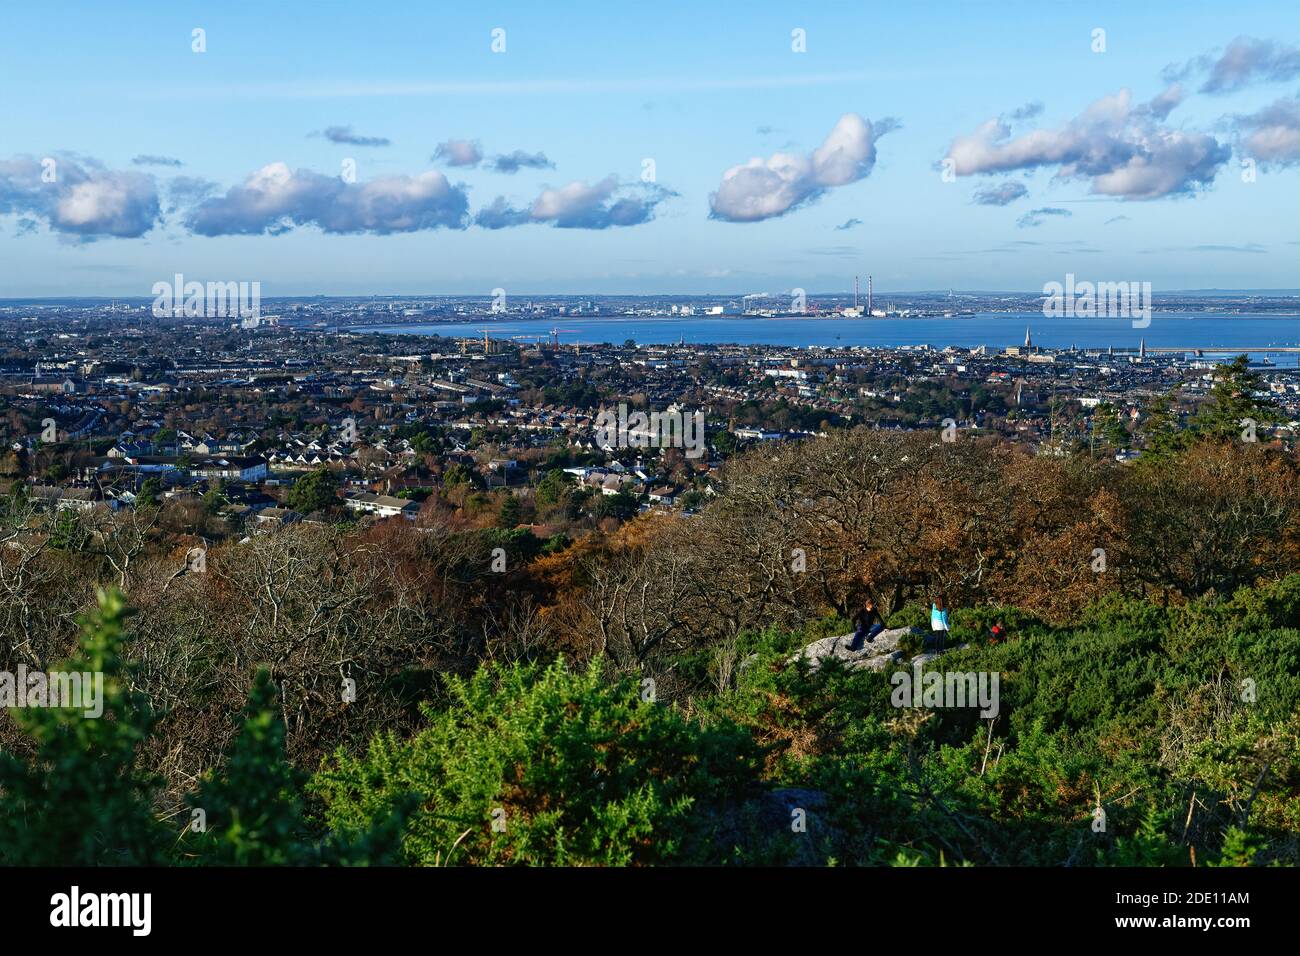 View of coastline of Dublin and Dun Laoghaire from Killiney Hill, Ireland Stock Photo